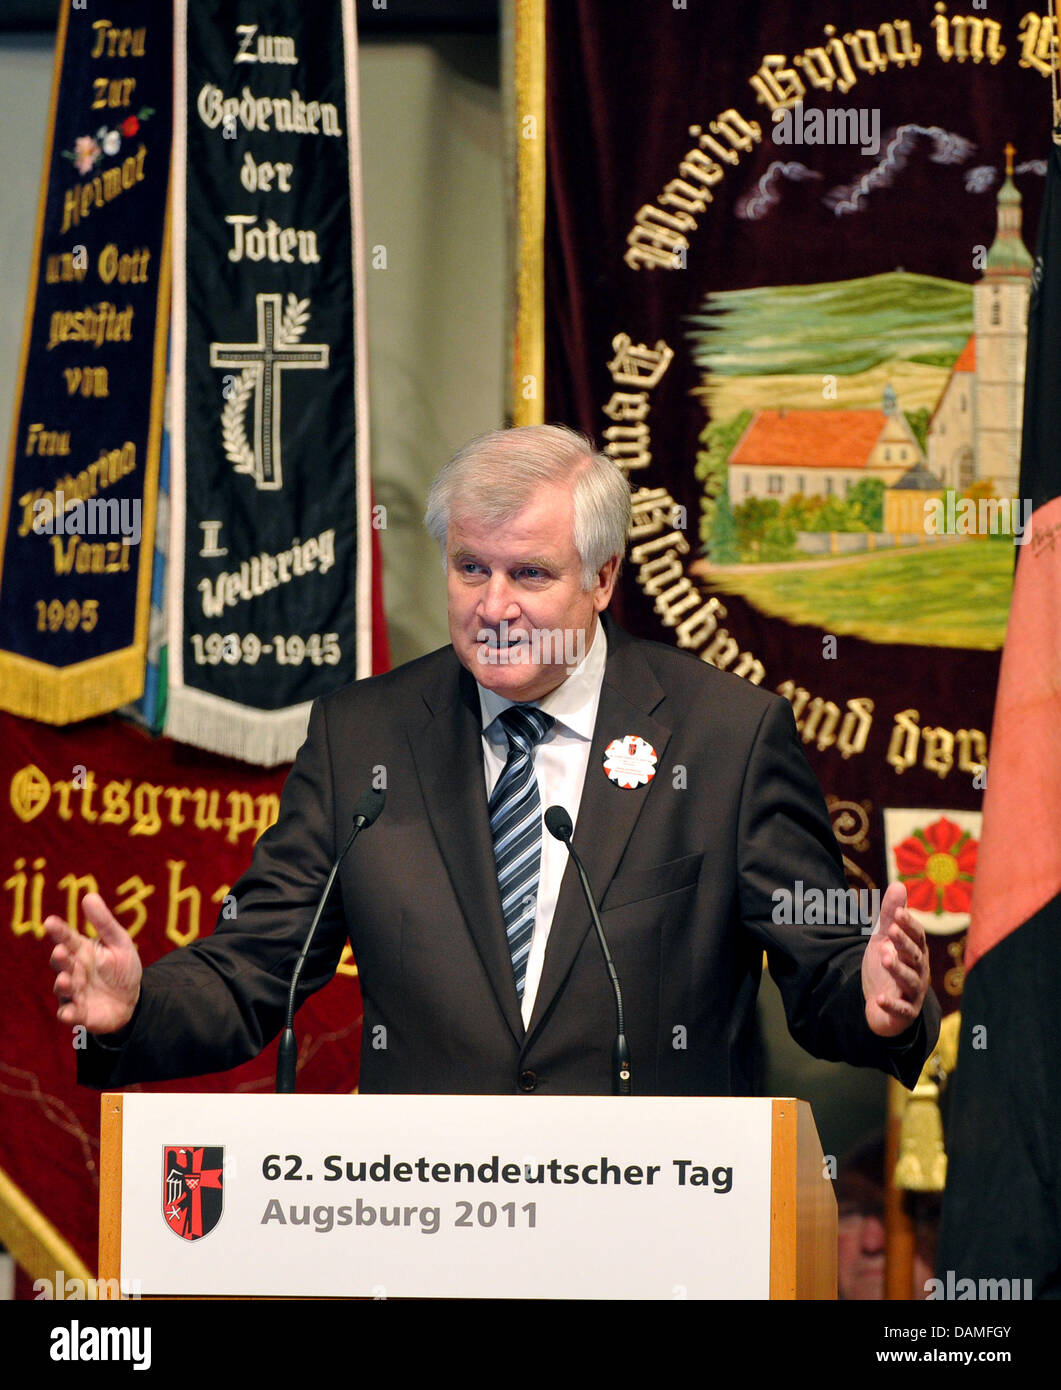 The Bavarian minister Horst Seehofer speaks at the central proclamation of the 62nd Day of the Sudeten Germans, joined by thousands of expellees from the Sudetenland, inside the Swabians' hall (Schwabenhalle) in Augsburg, Germany, 12 June 2011. Photo: STEFAN PUCHNER Stock Photo